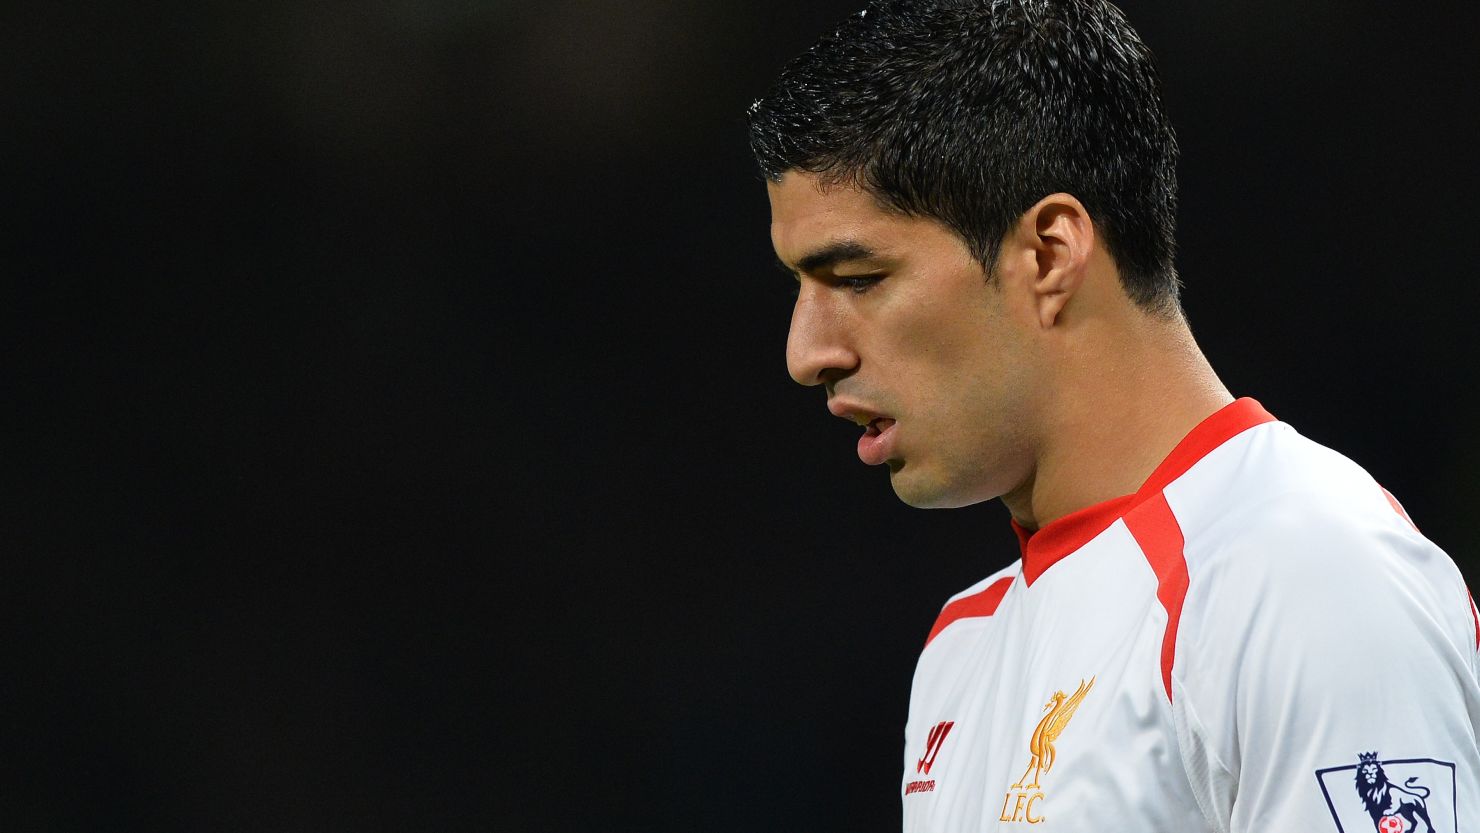 Luis Suarez made his long awaited return to competitive action for Liverpool at Manchester United.  